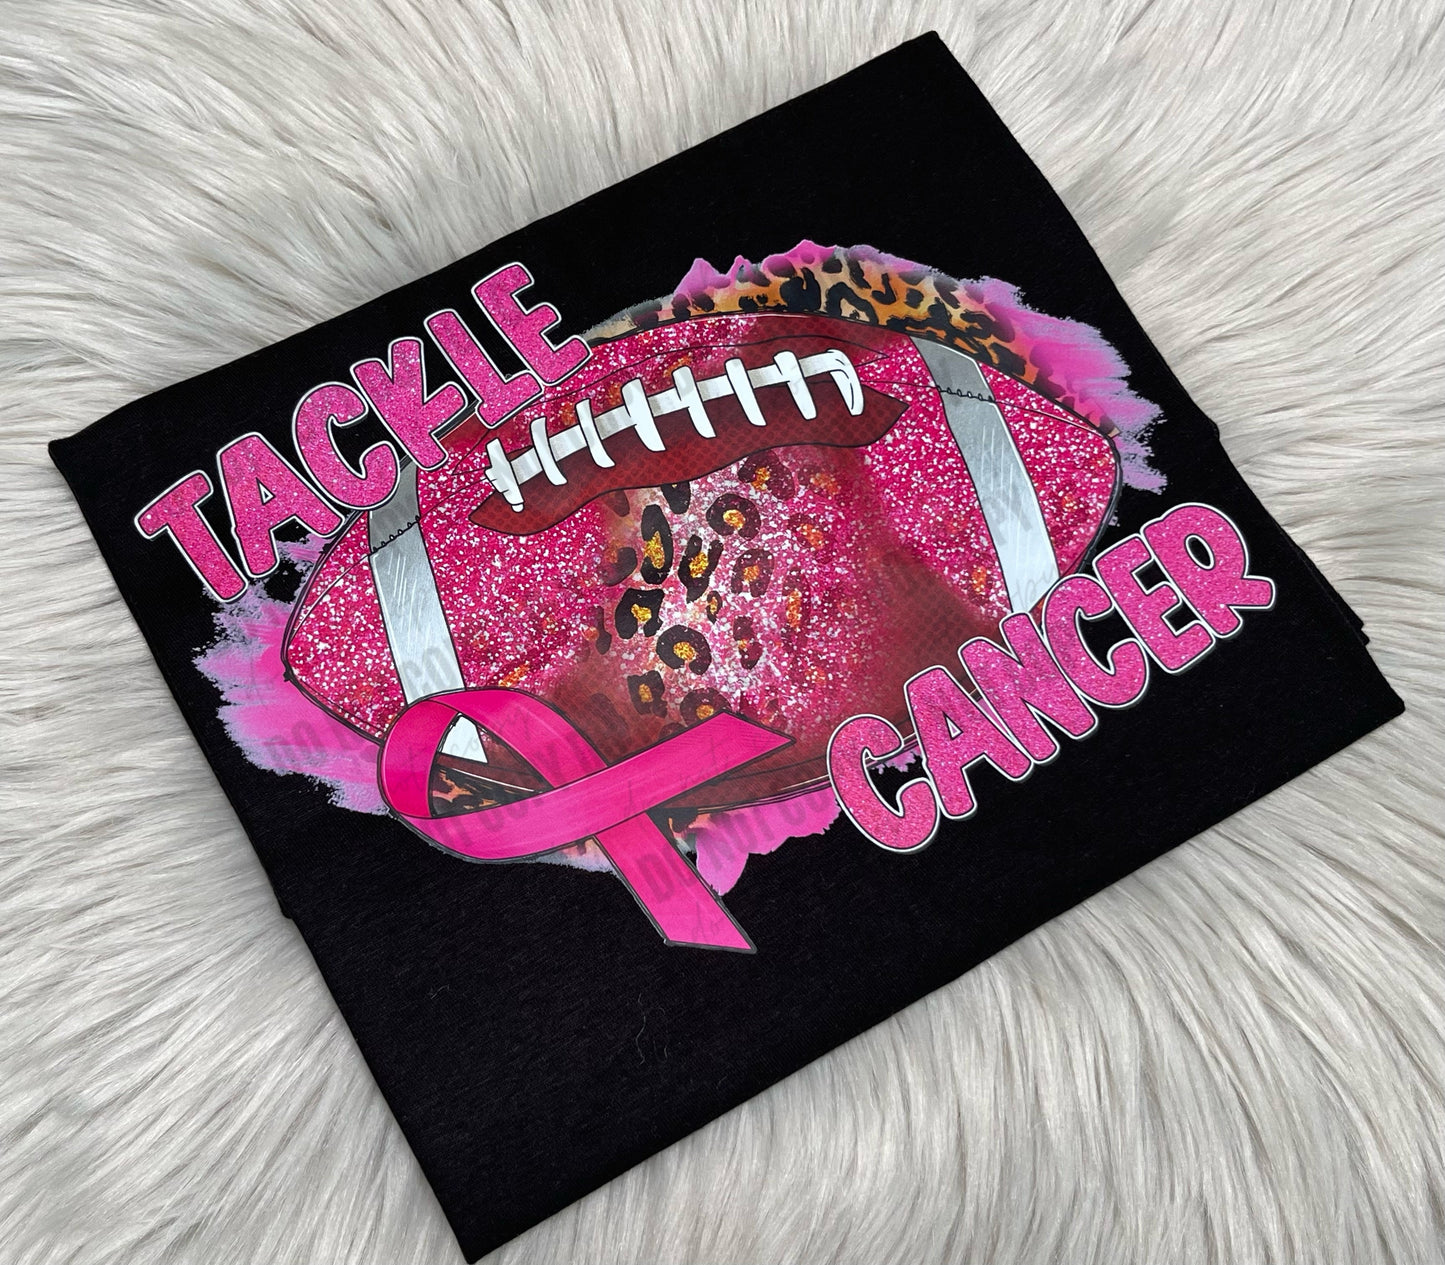 Tackle Cancer - WS